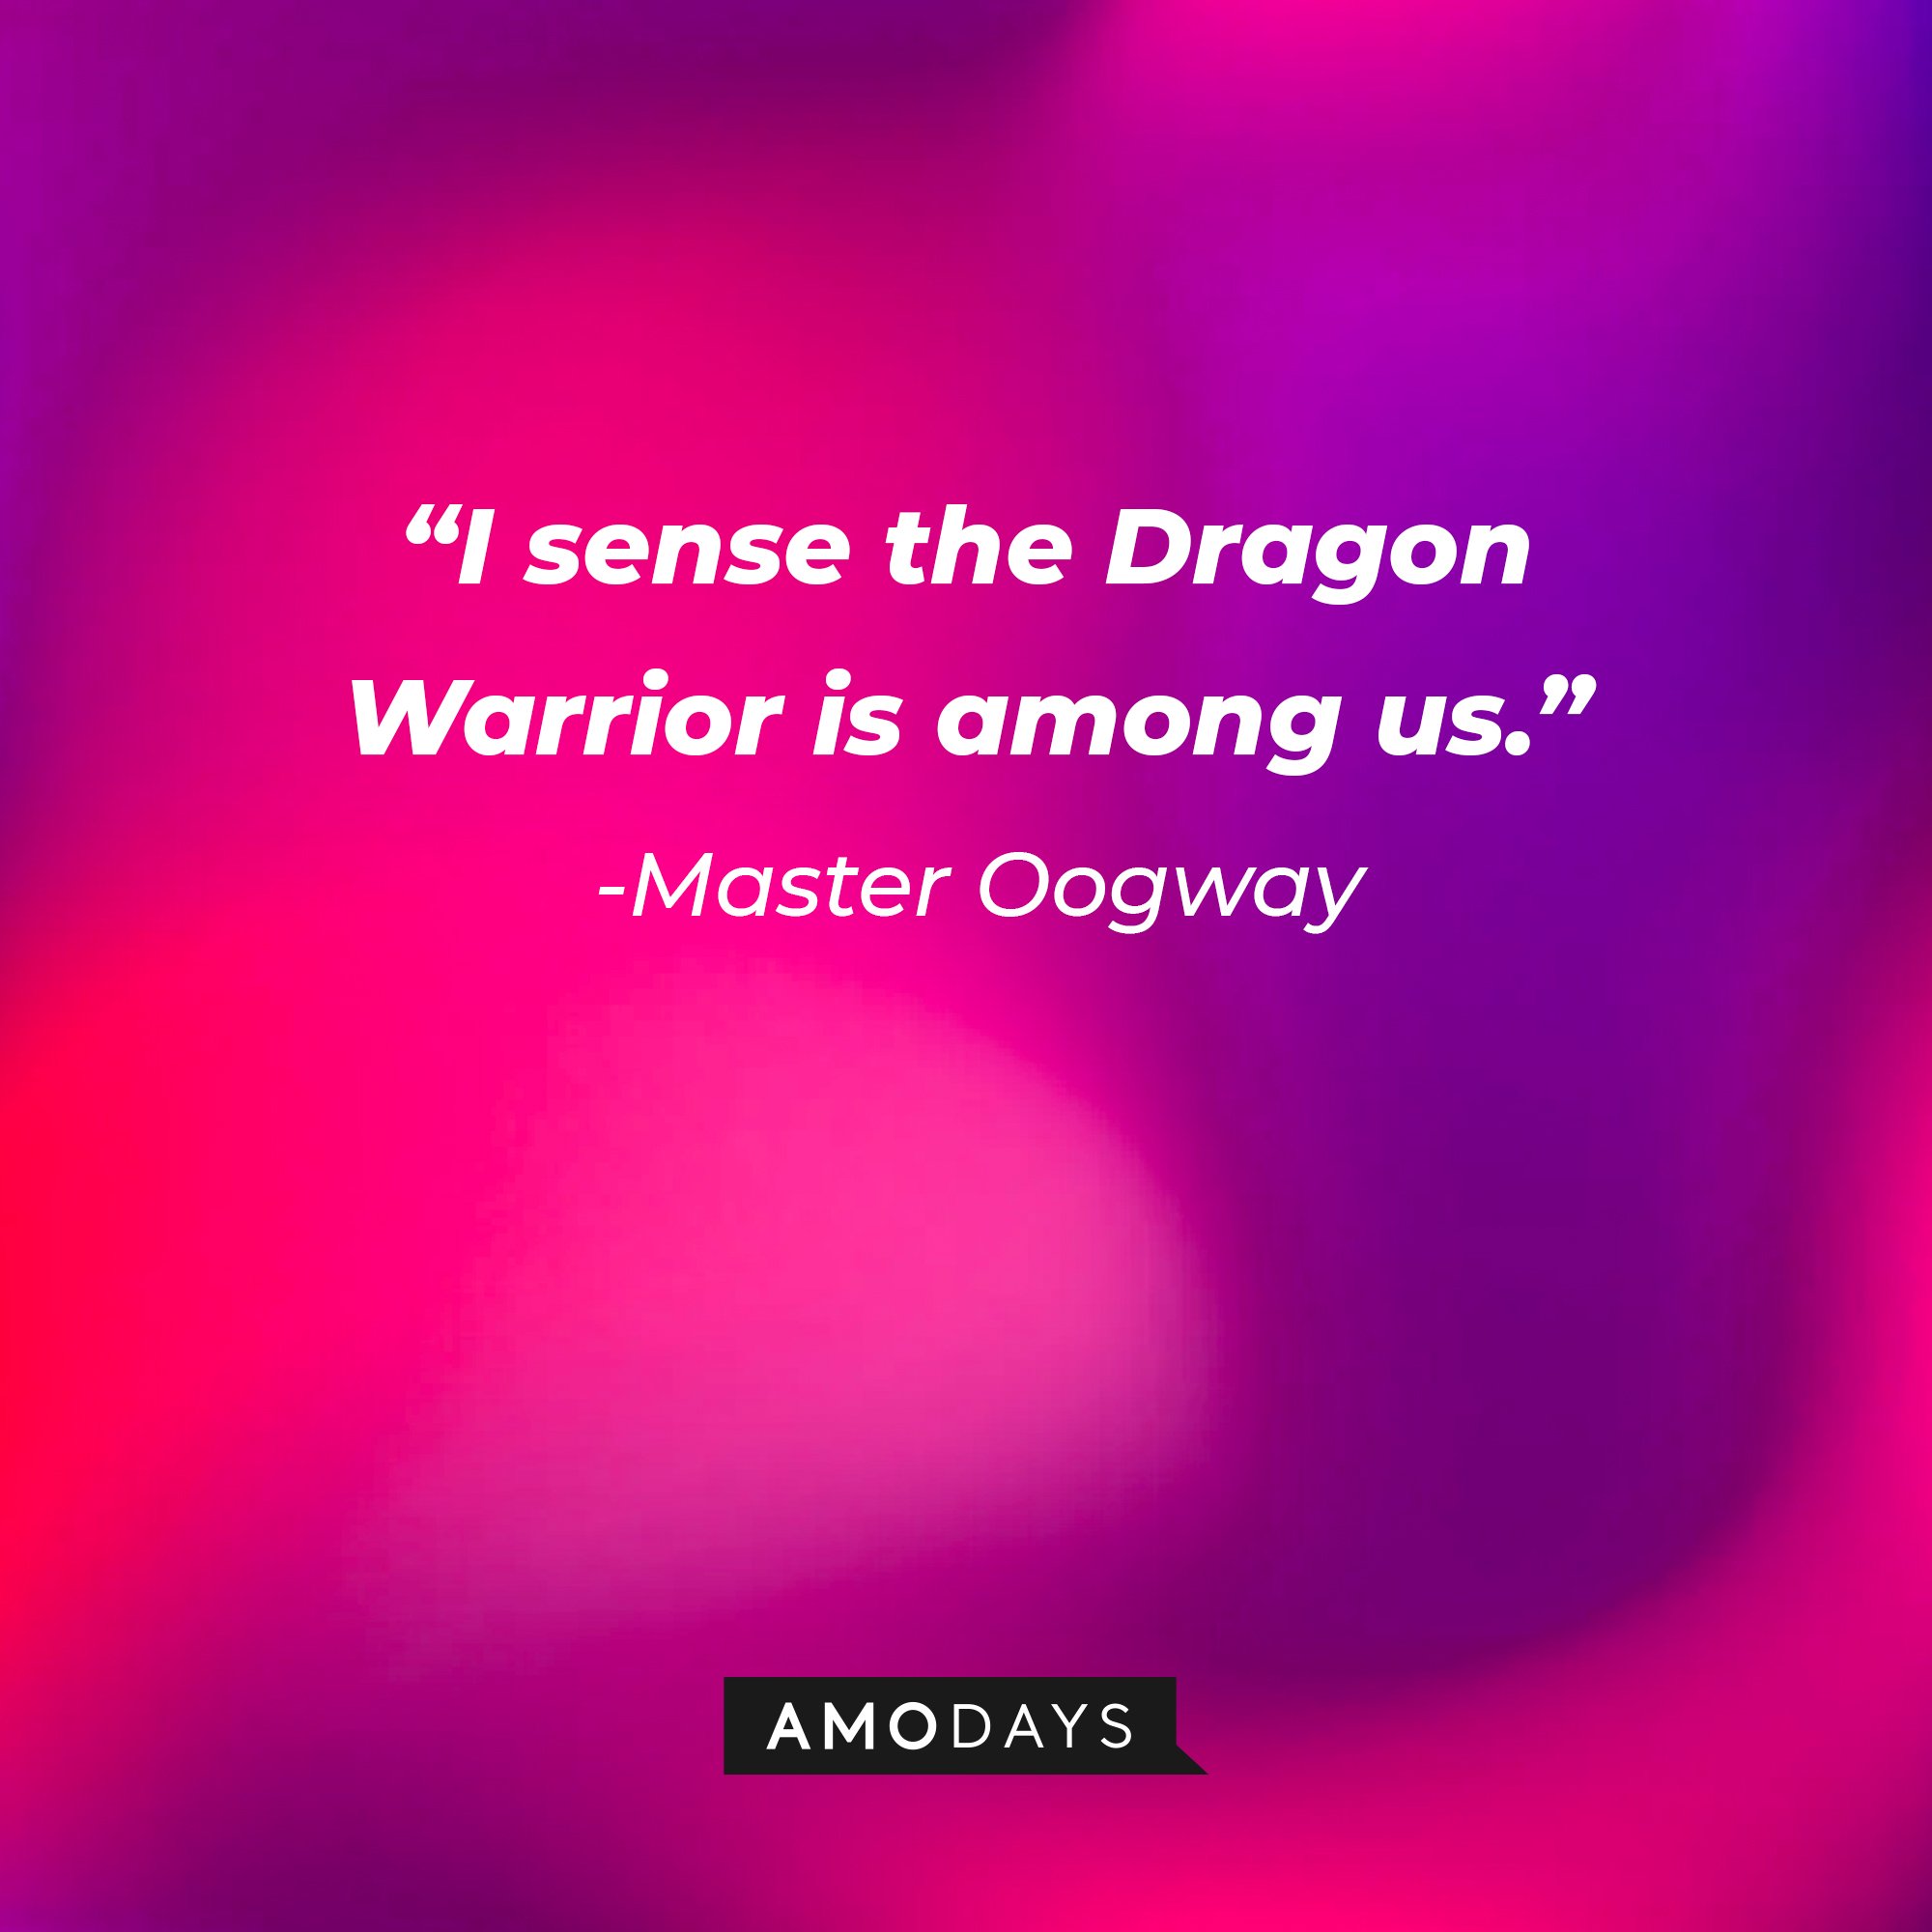 Master Oogway's quote: “I sense the Dragon Warrior is among us.” | Image: AmoDays